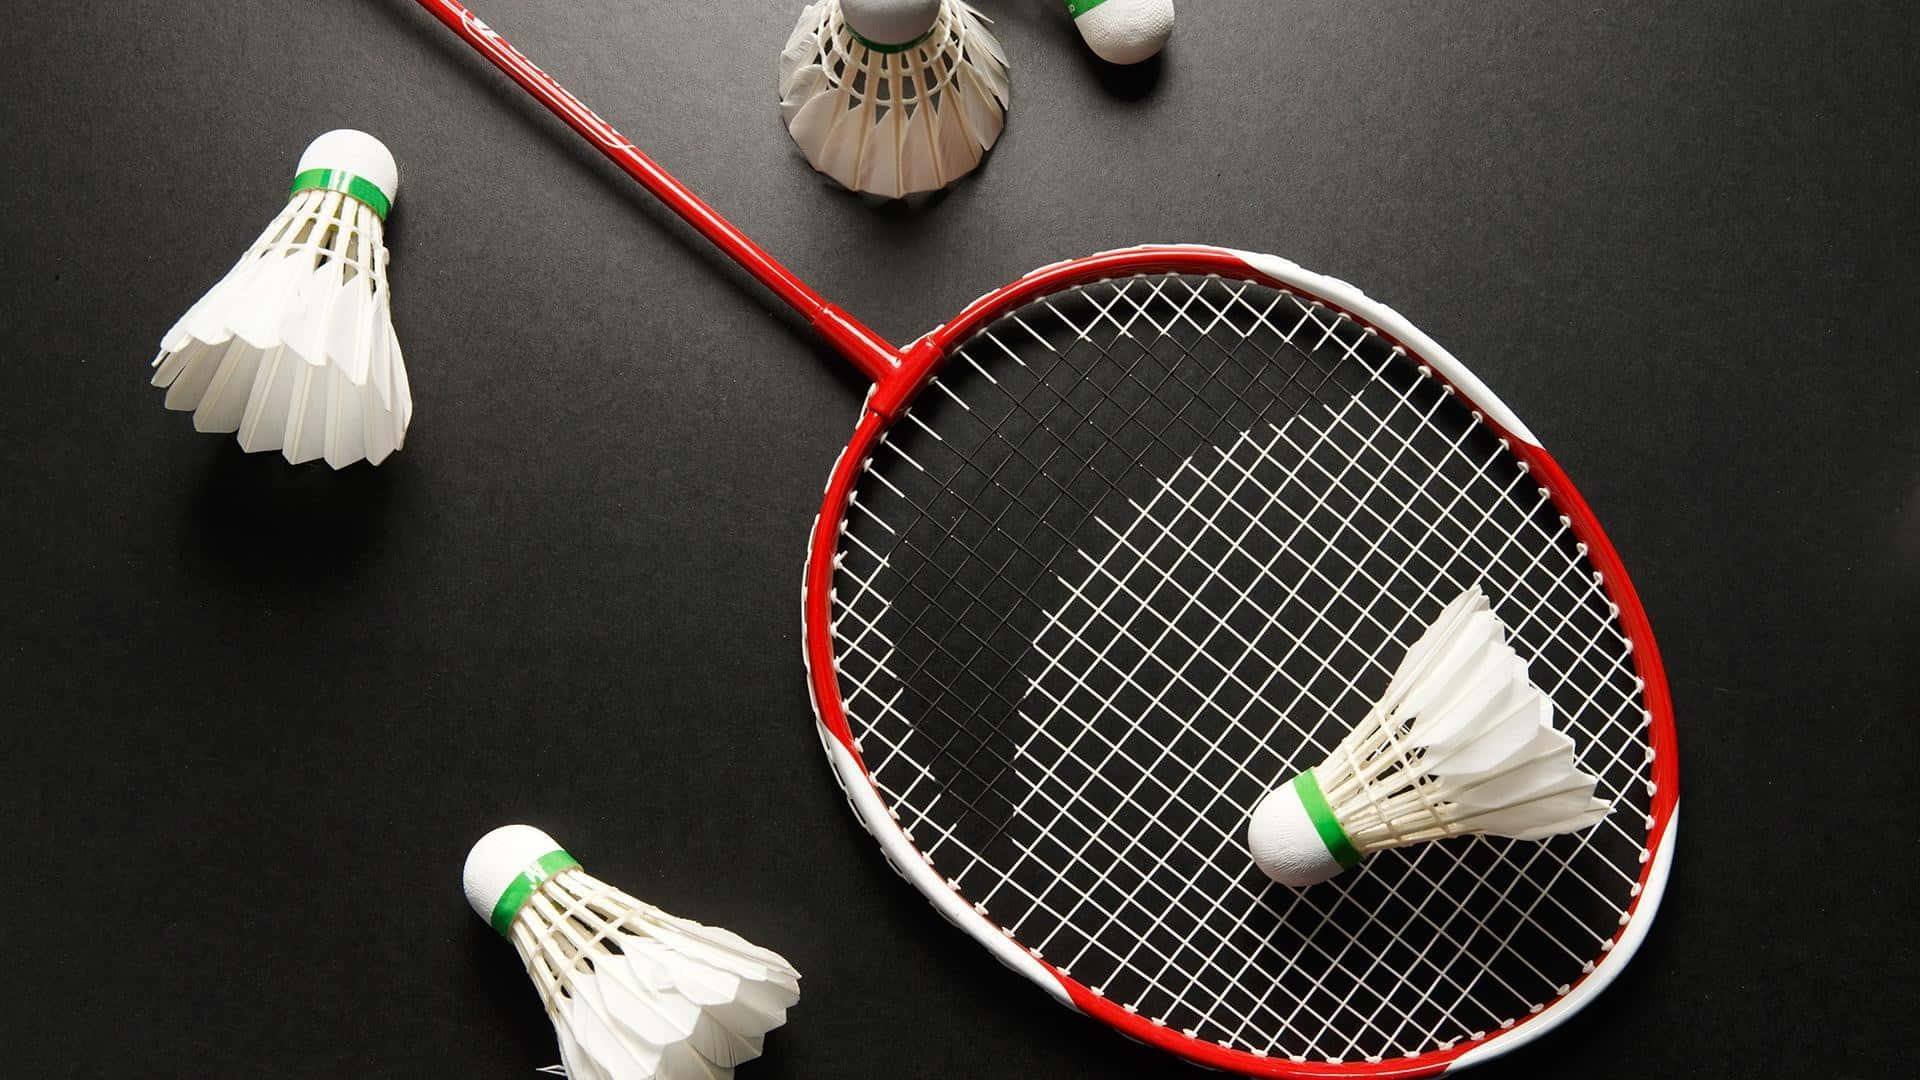 Get the best out of your game with Best Badminton